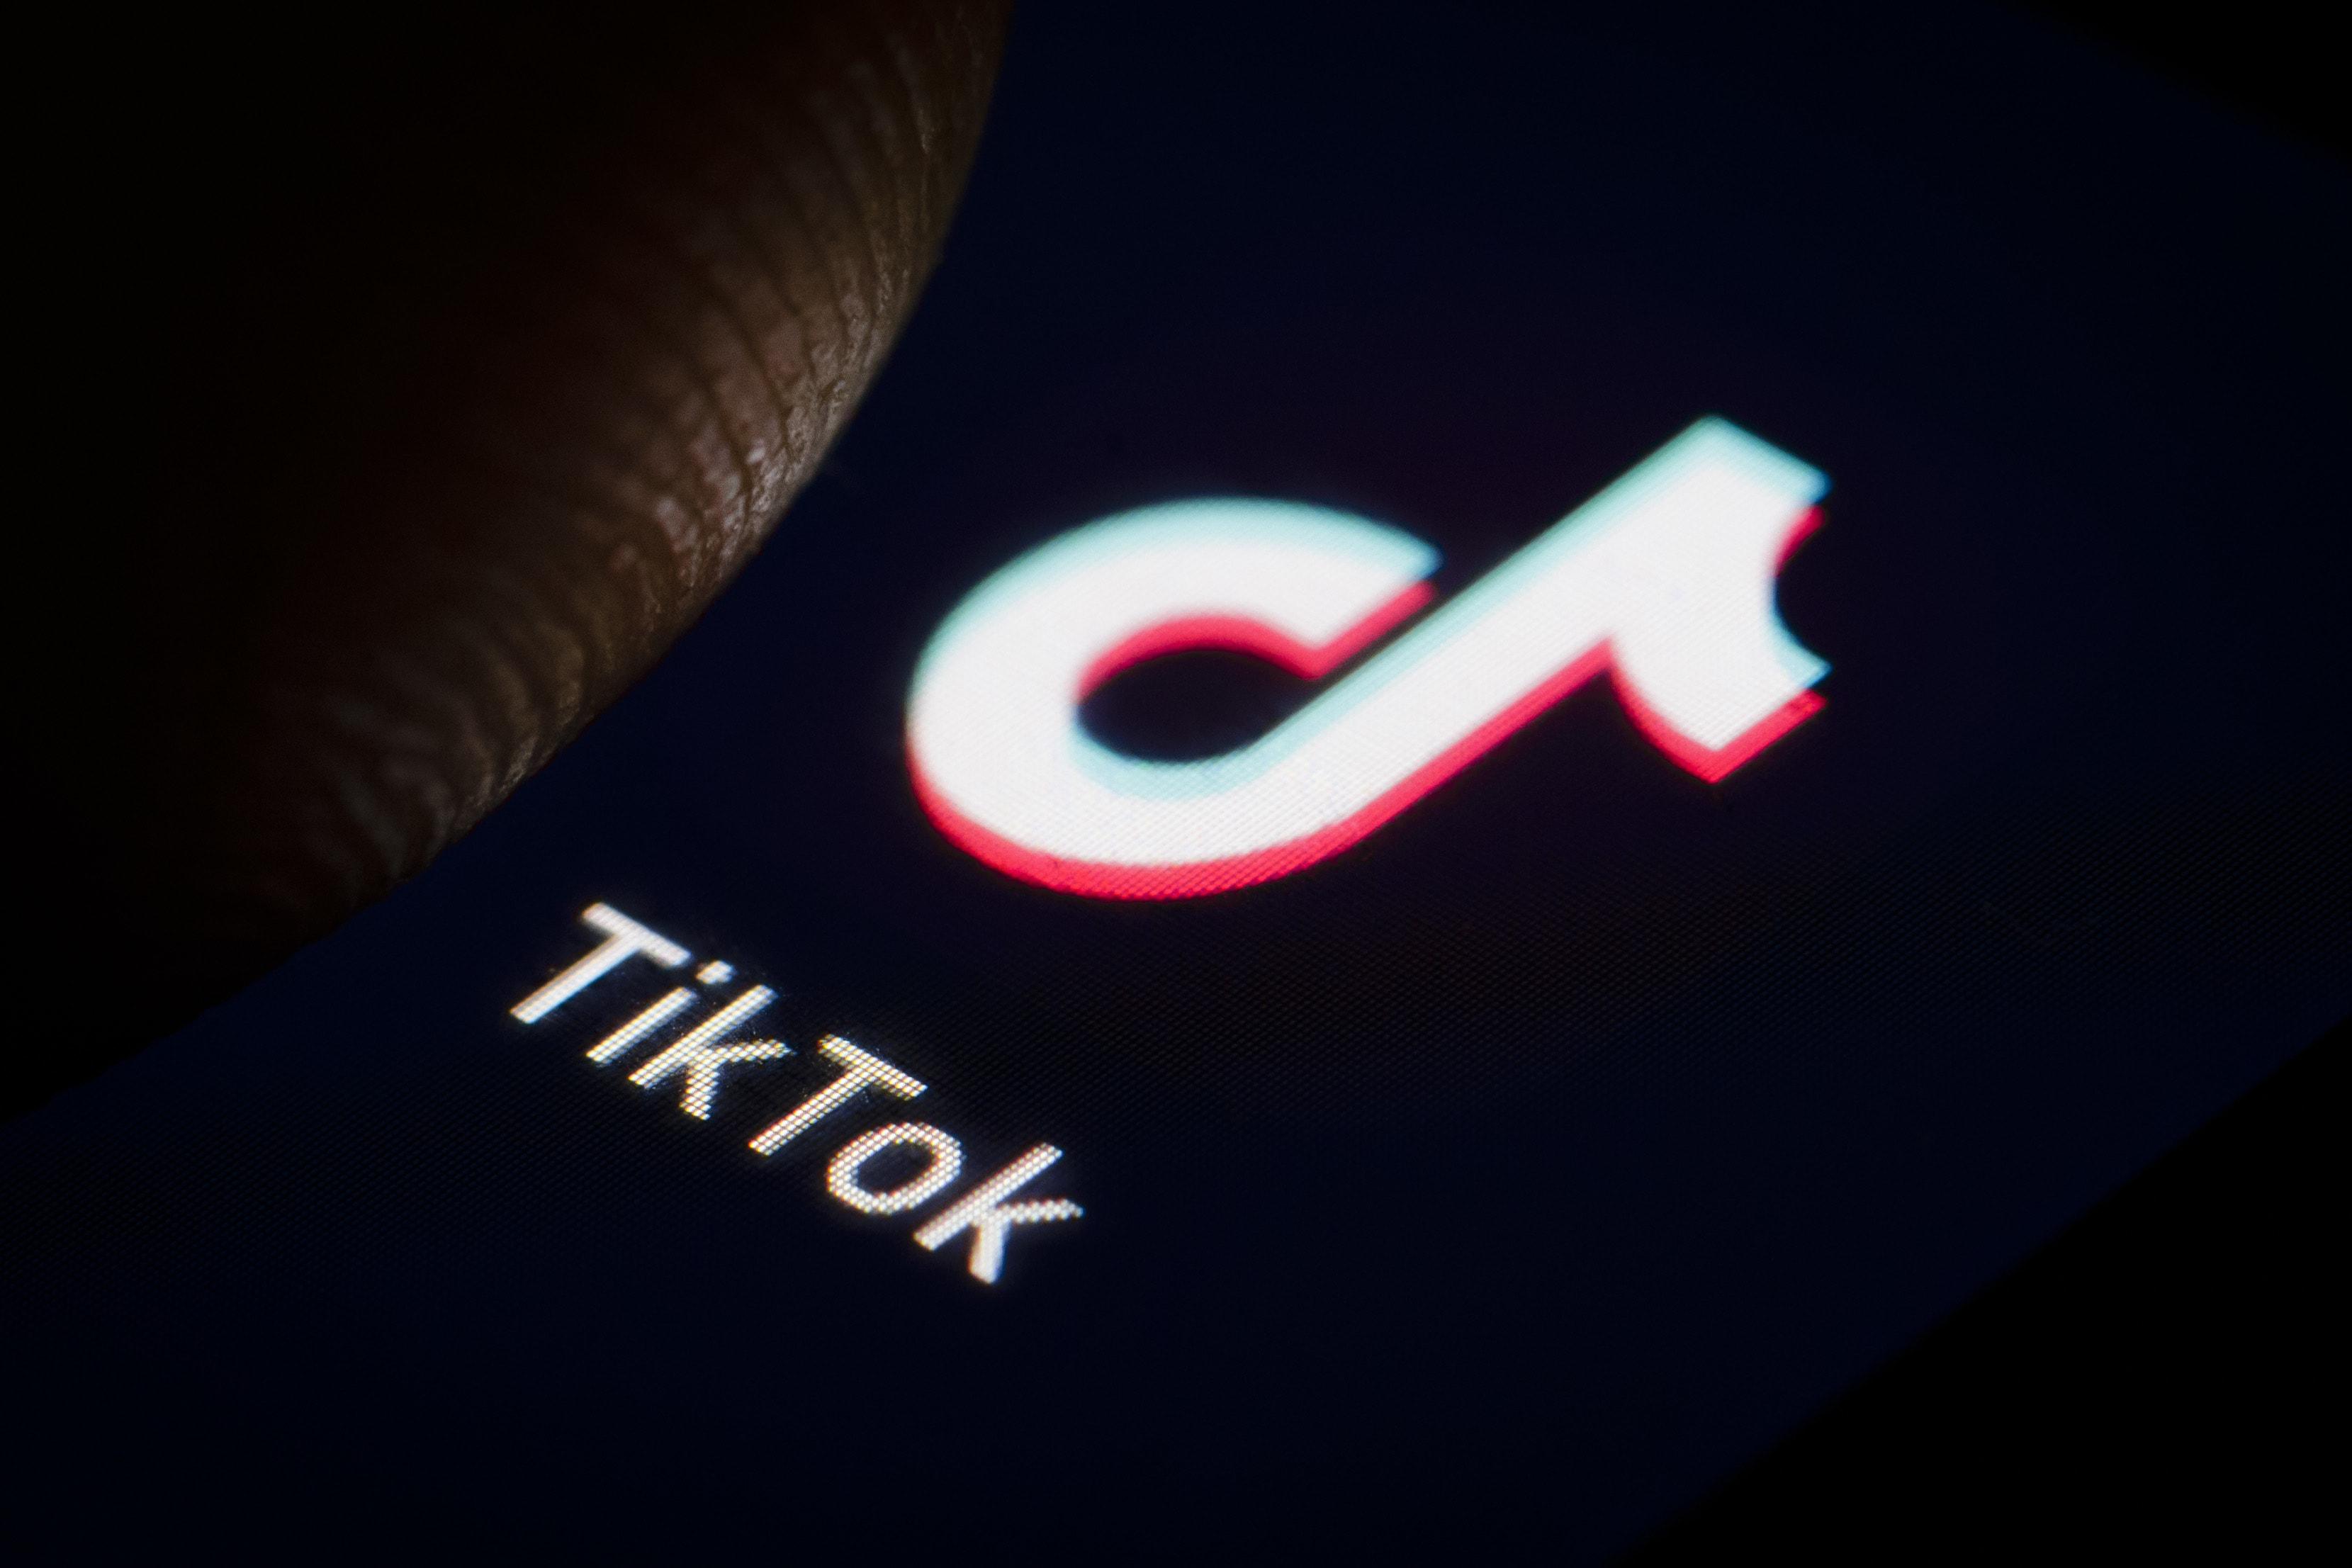 TikTok Logo - TikTok owner ByteDance: What to know about the Chinese tech giant